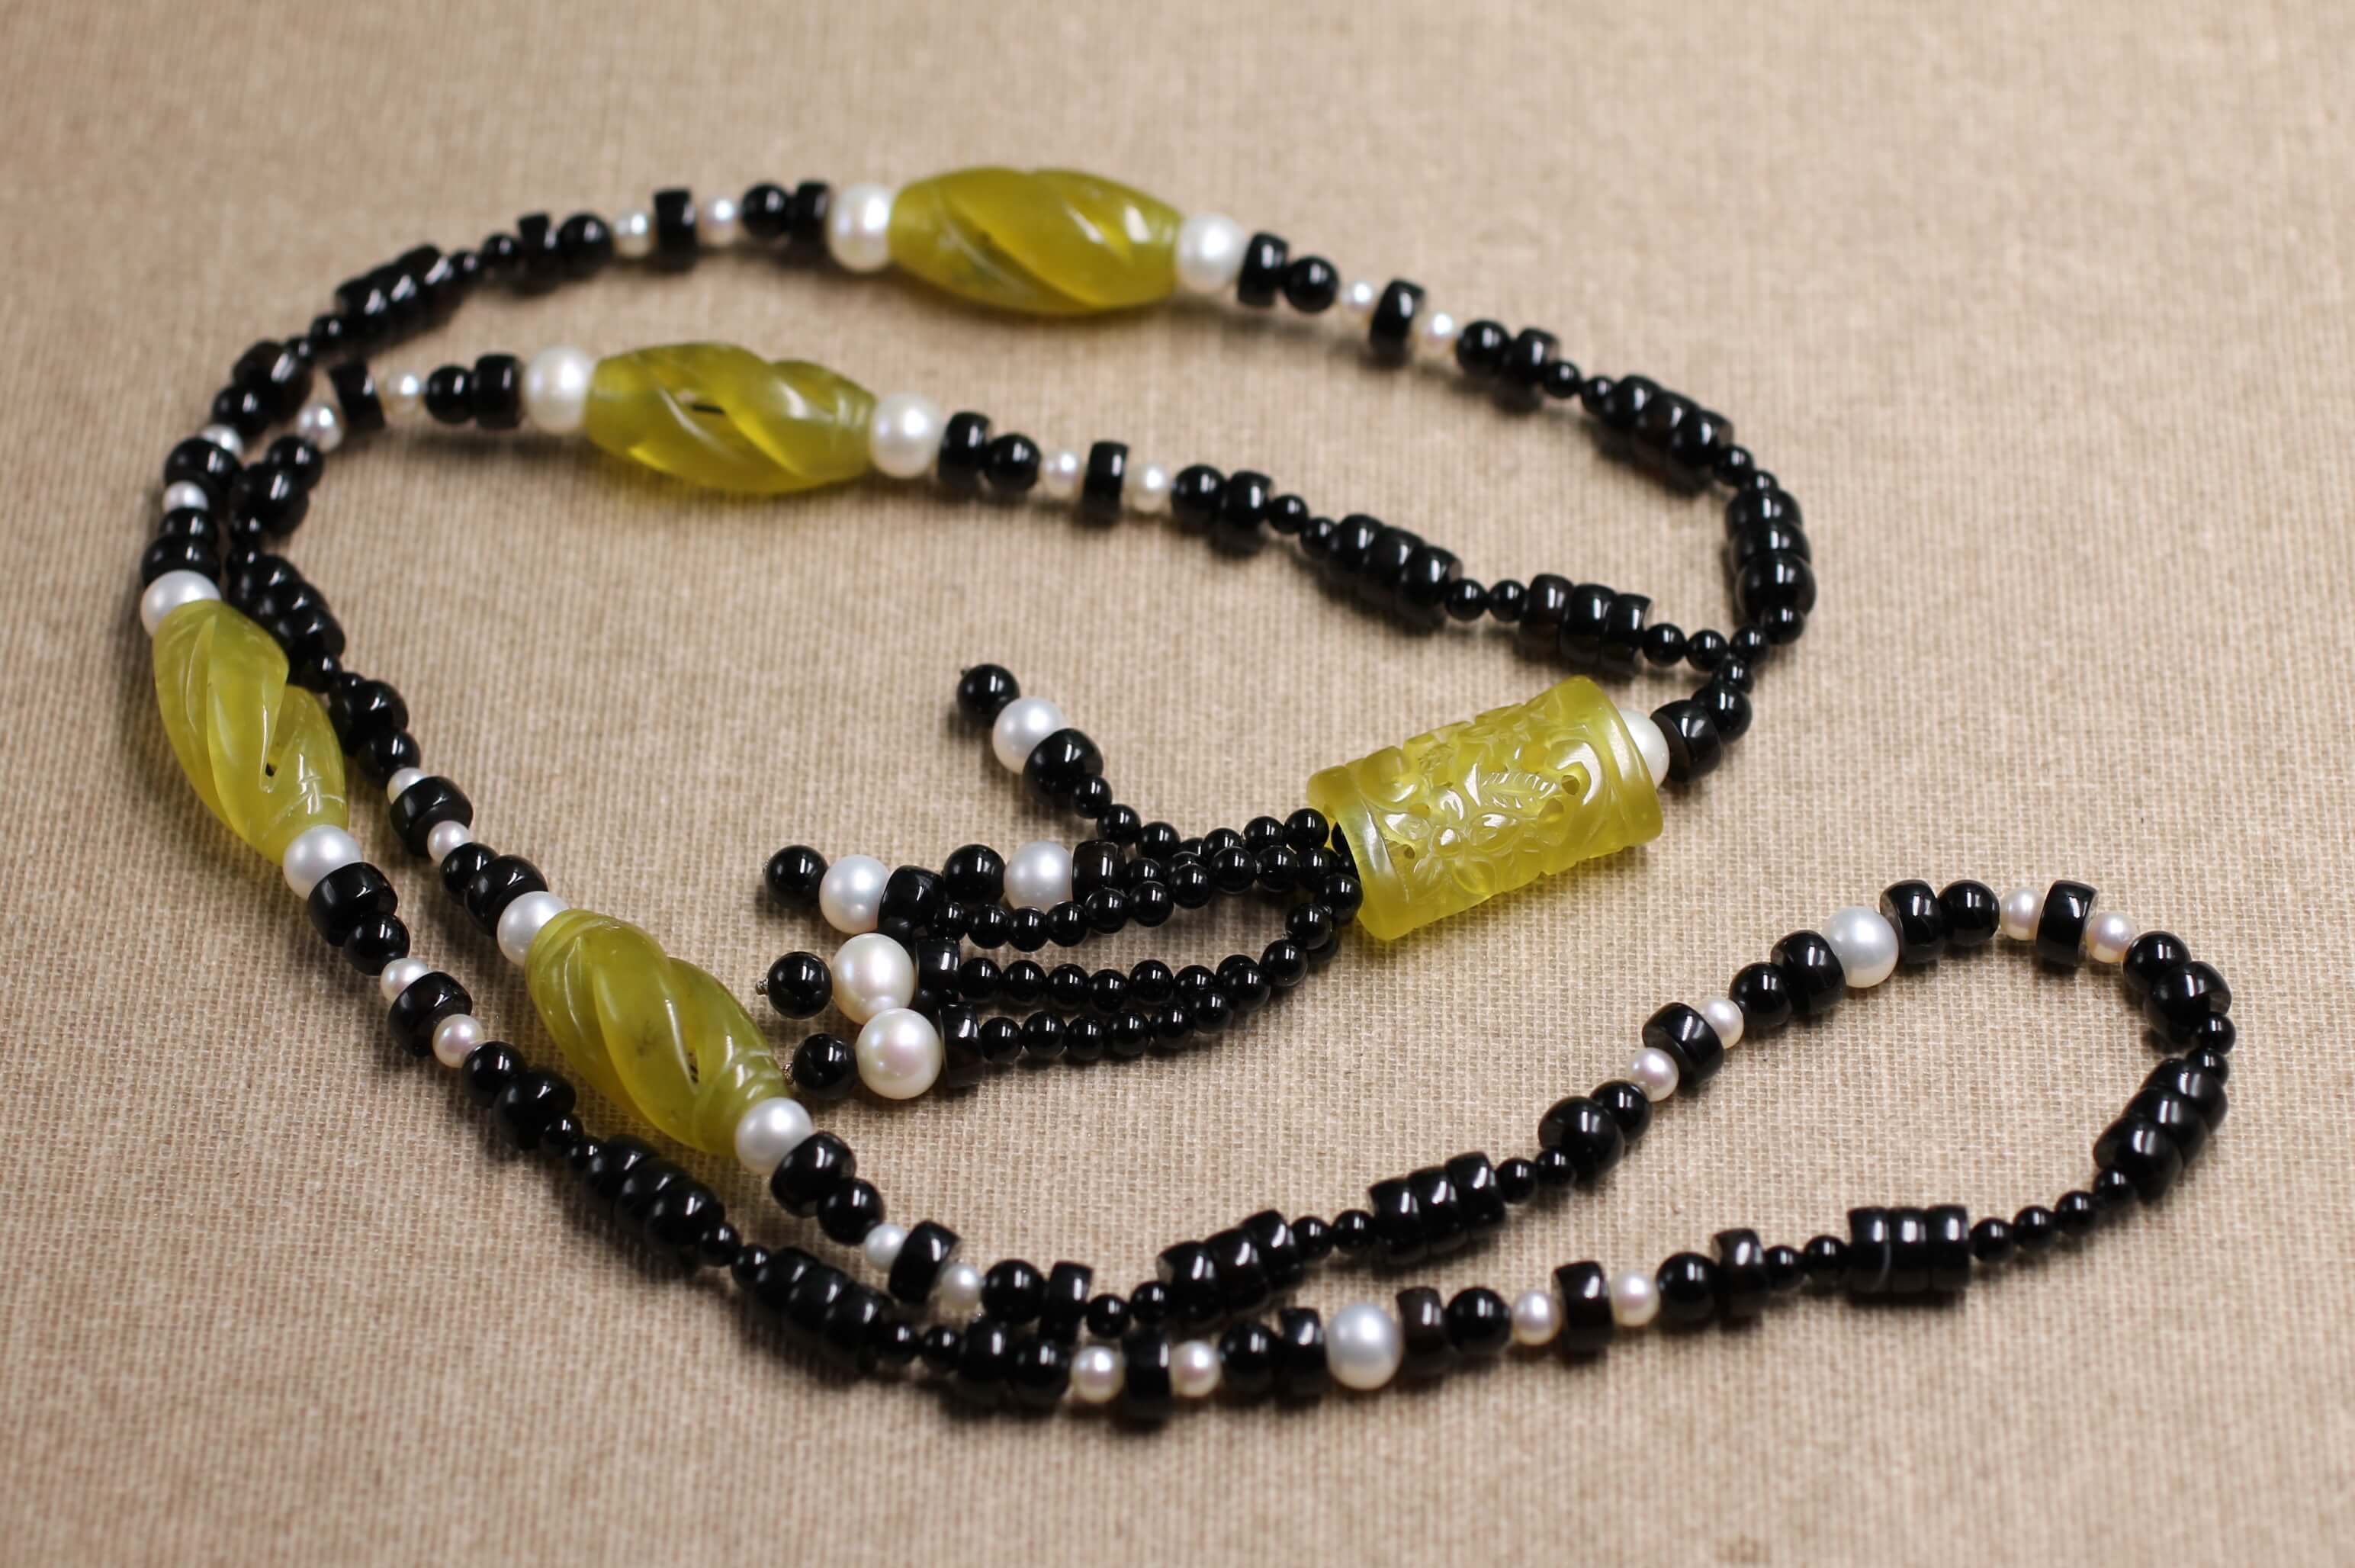 Onix, Serpentine and Pearls necklace